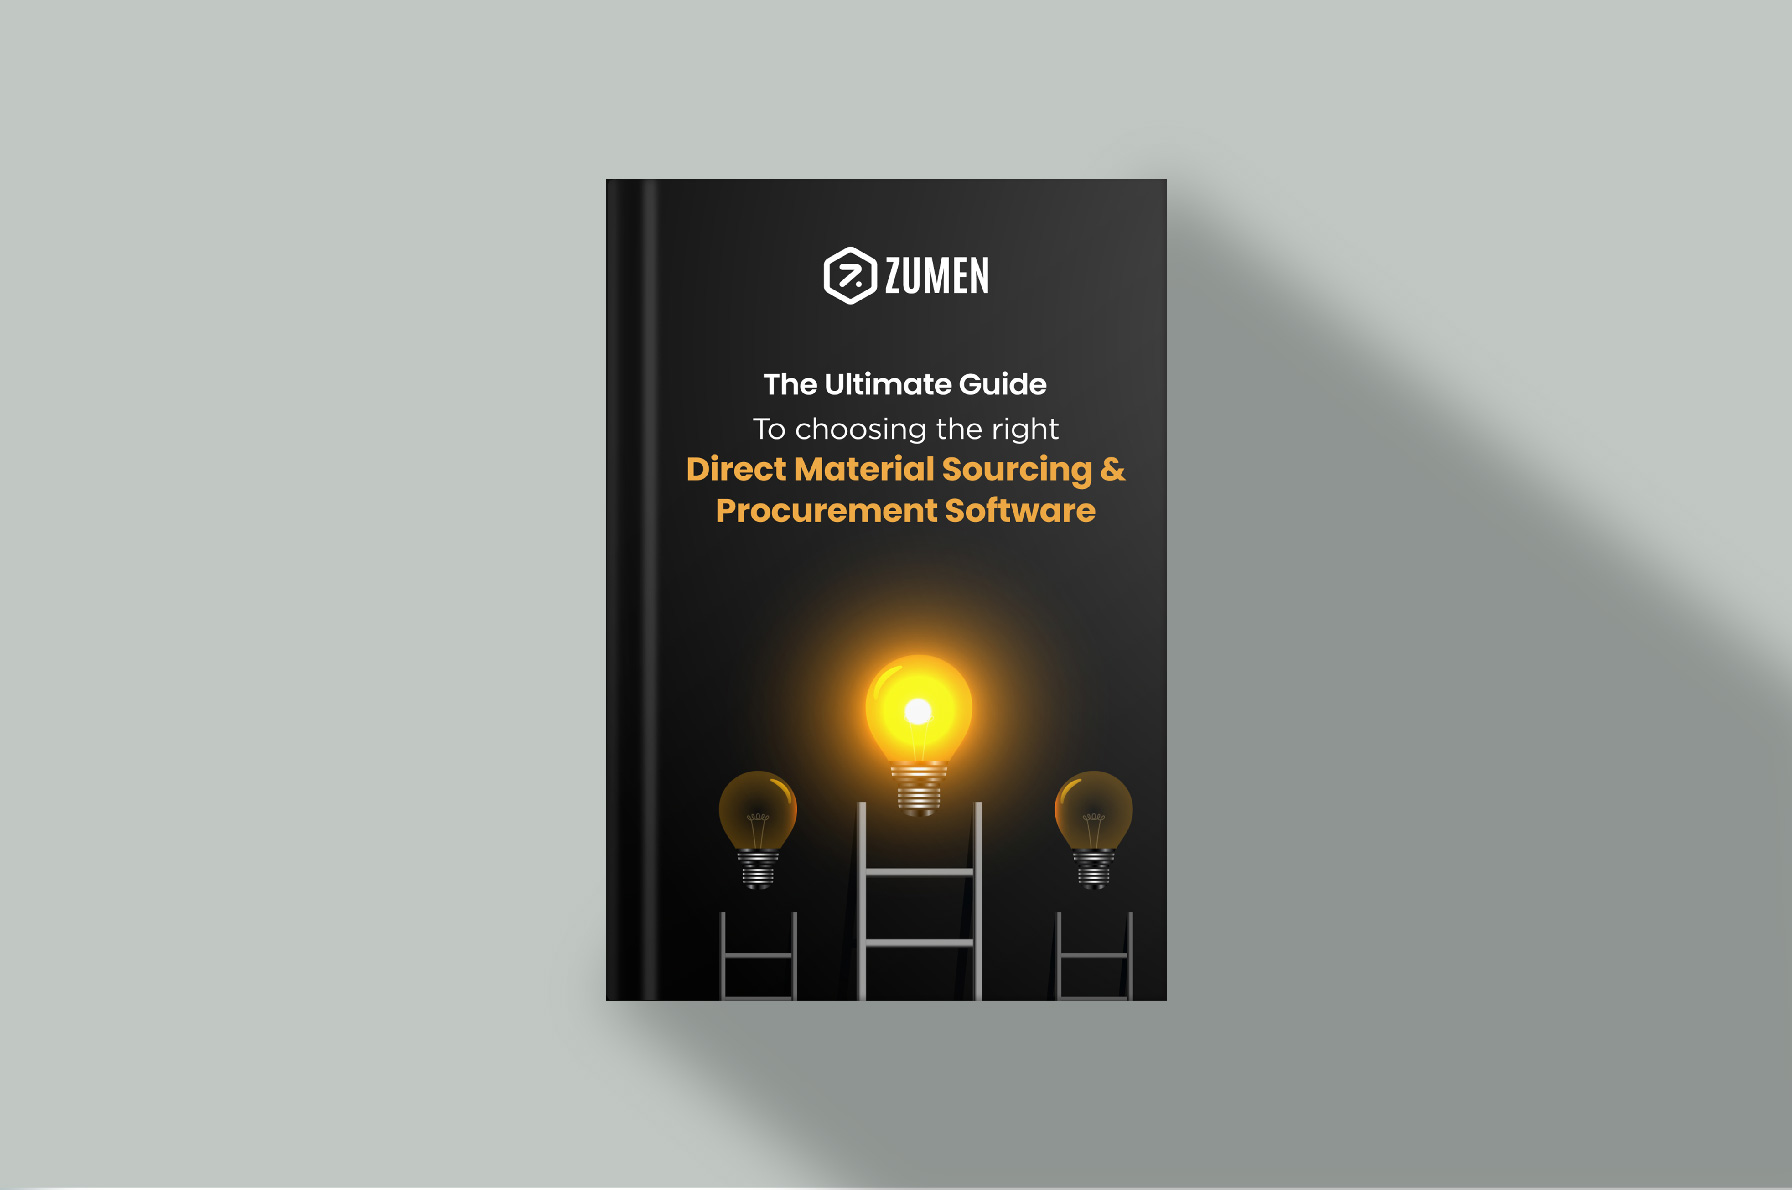 The Ultimate Guide to choosing the right Software for Direct Material Sourcing & Procurement